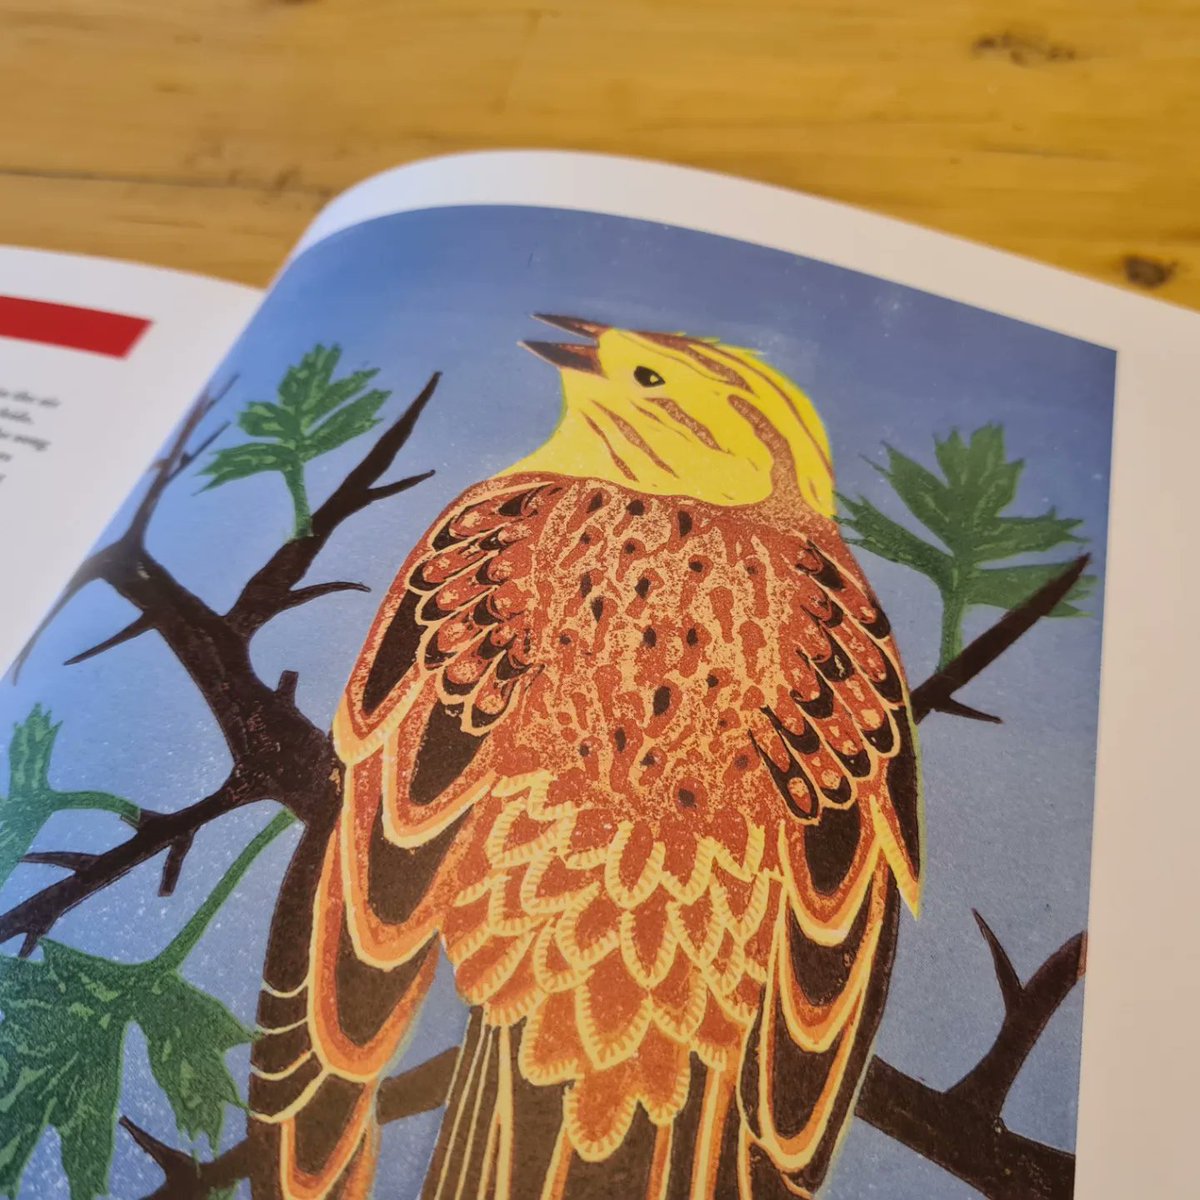 My copy of #IntoTheRed arrived this morning, featuring a page on the yellowhammer by yours truly (accompanying artwork by @a_deegan). A beautiful but sad book, put together by @YoloBirder and @miketoms for the @_BTO